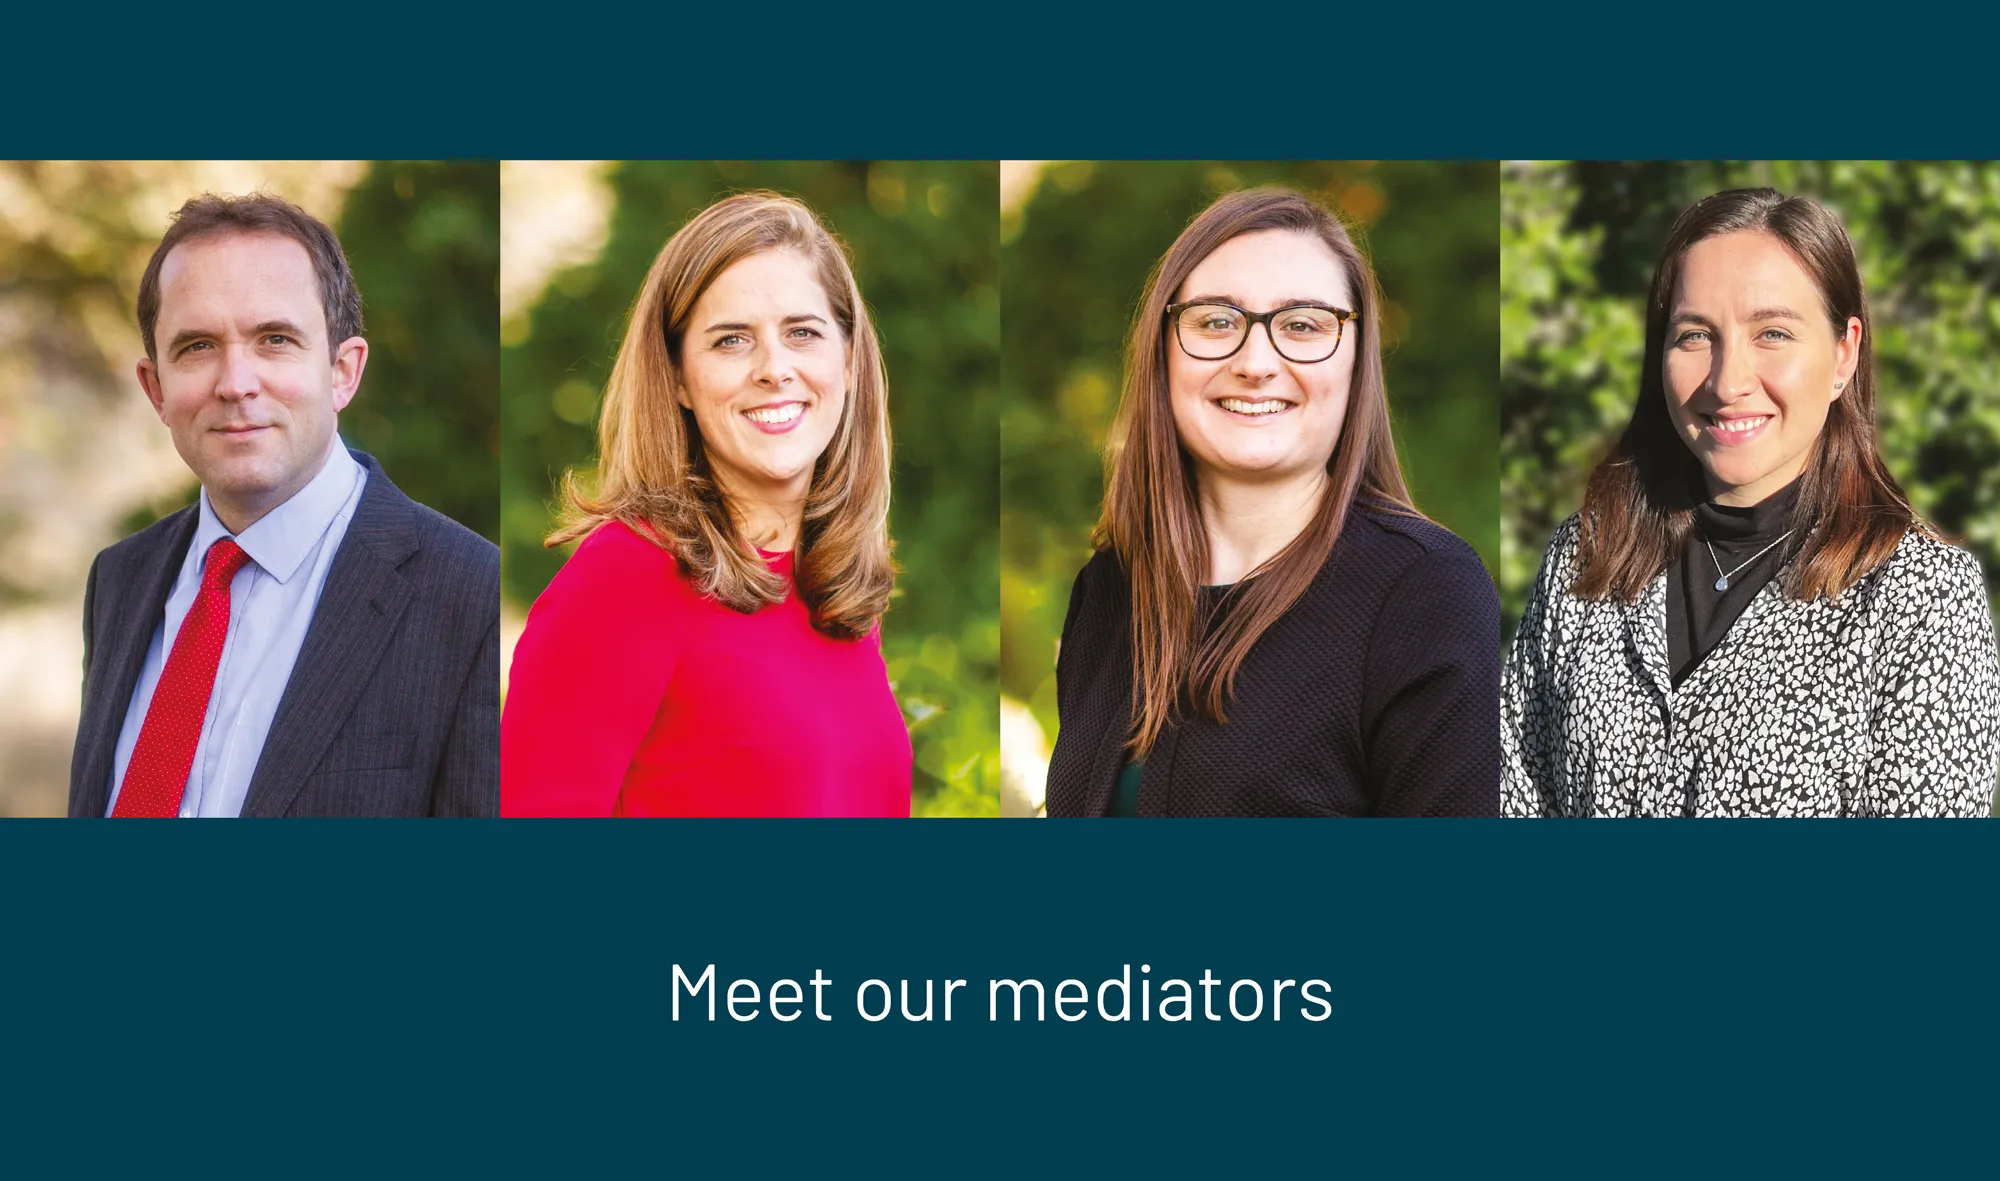 Edward Cooke Family Law: Meet our mediators